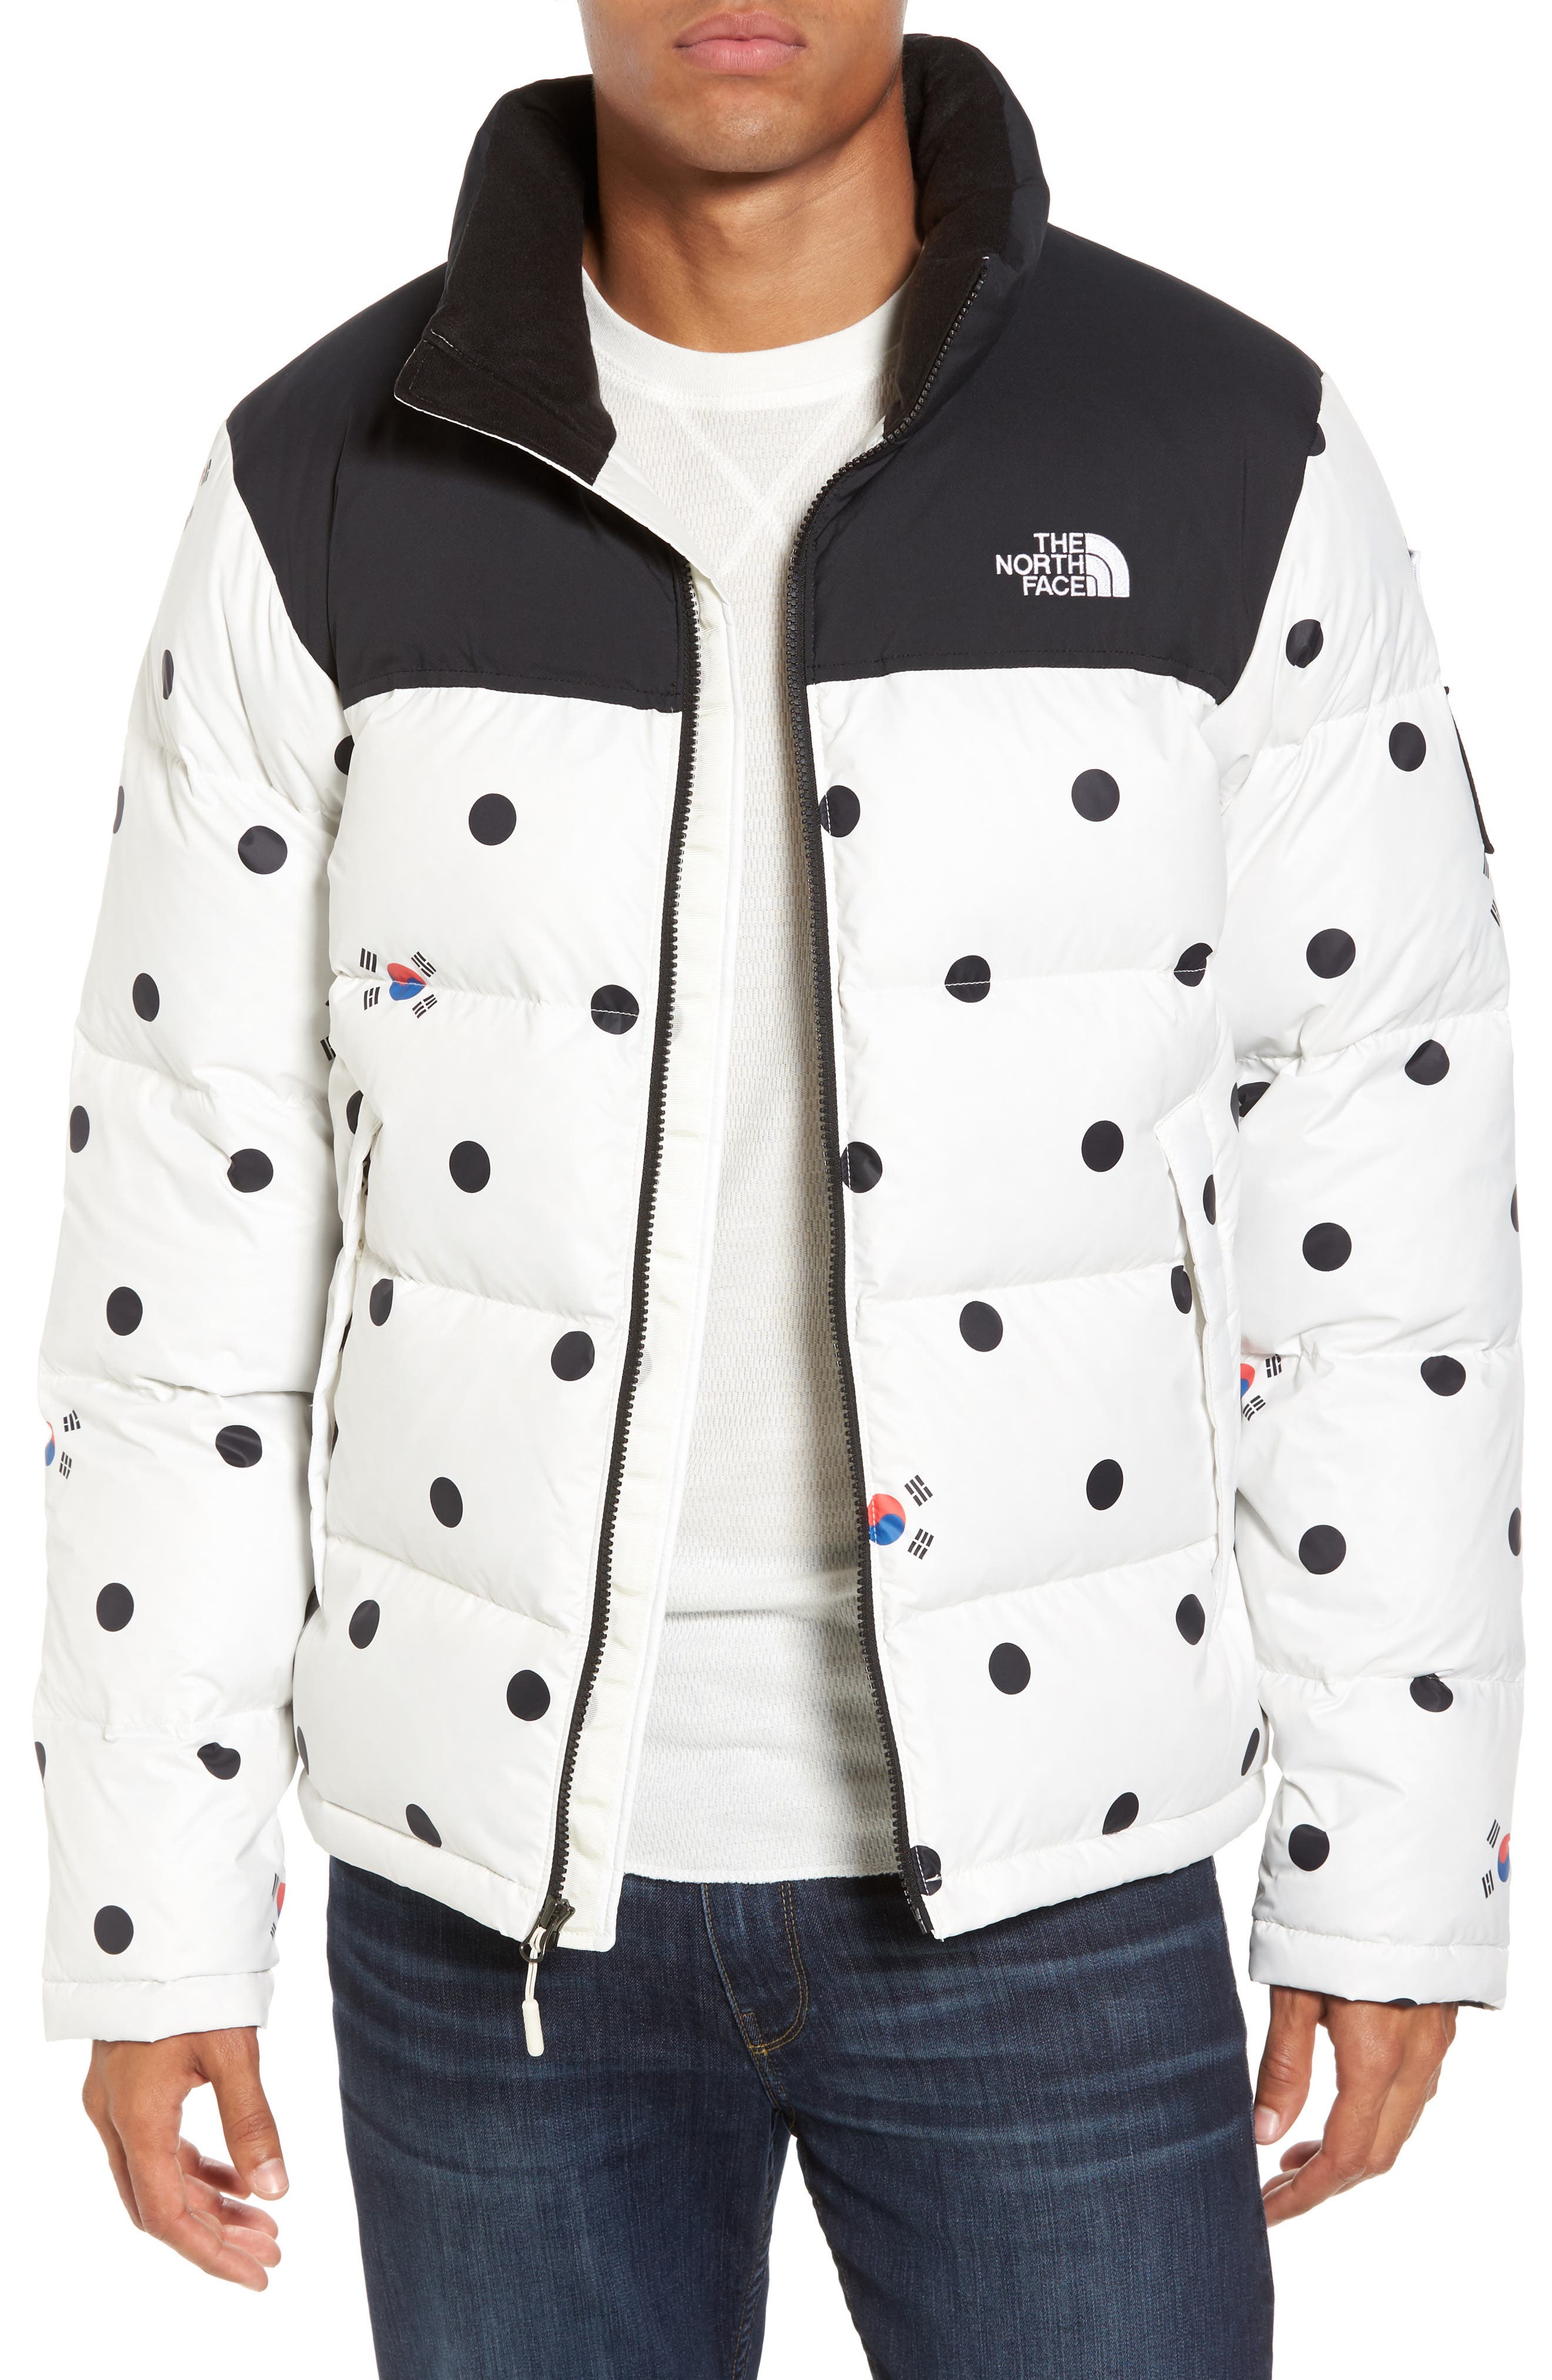 The North Face International Collection 